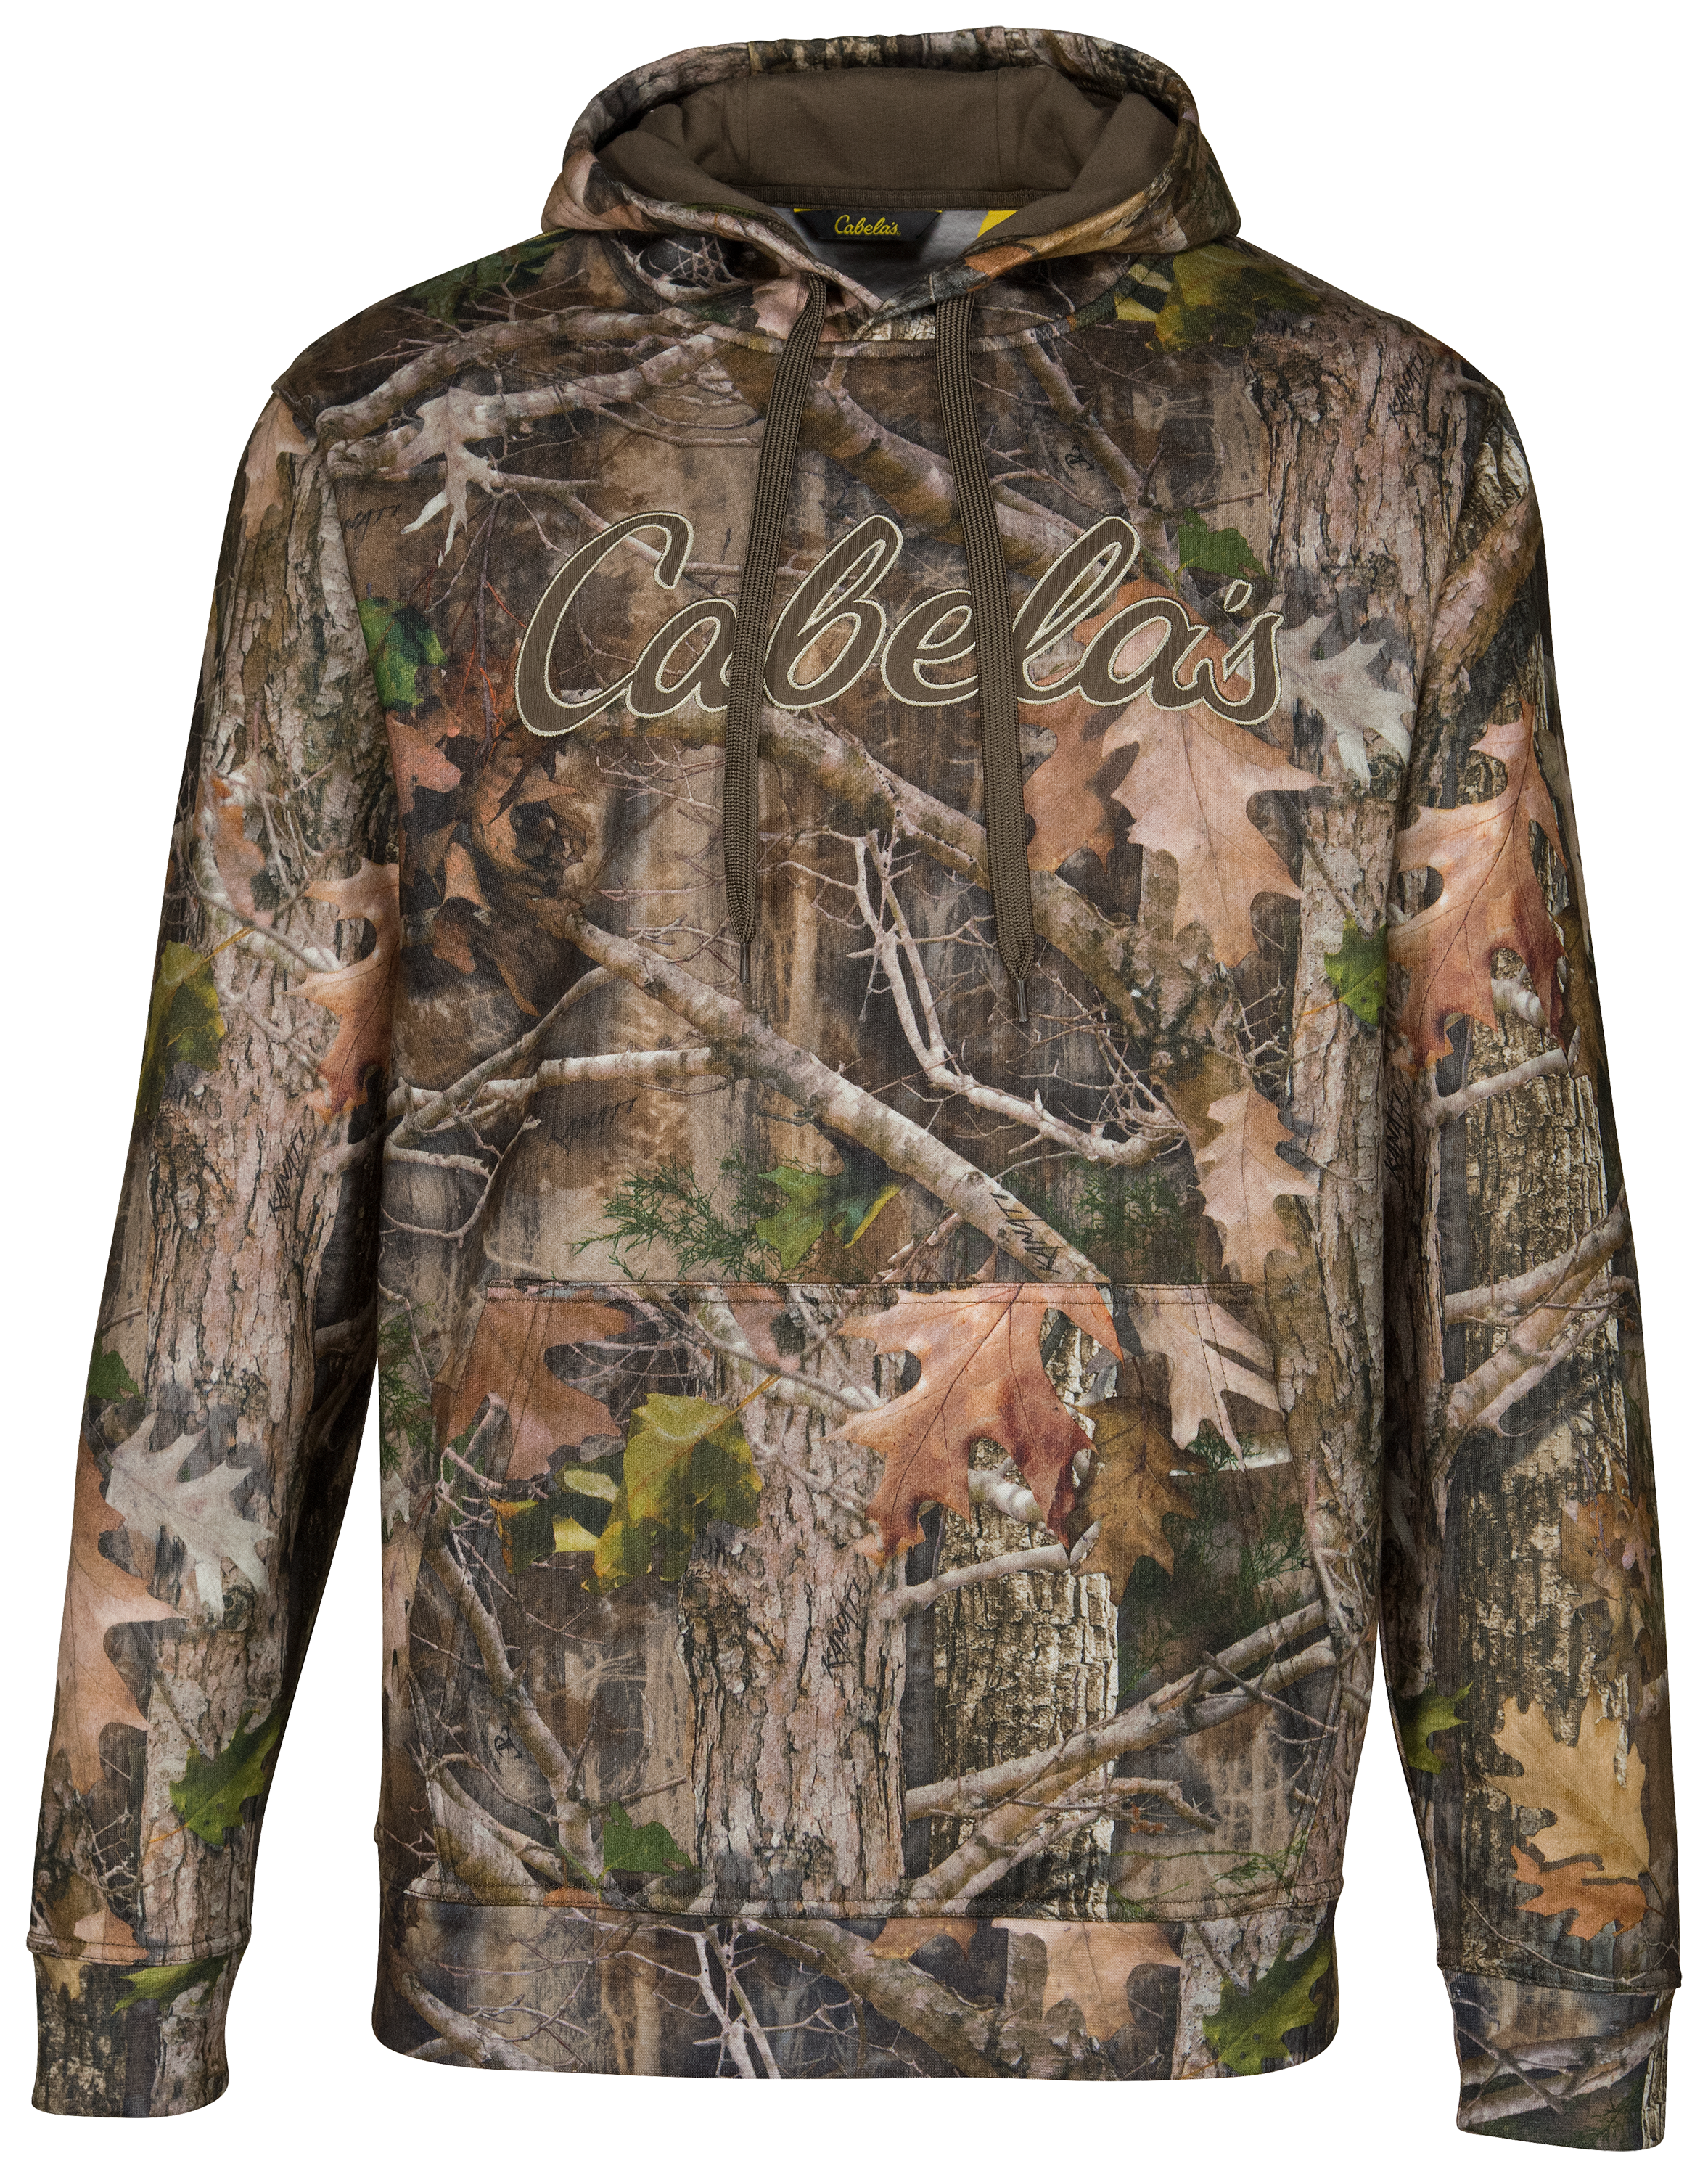 Cabela's Camo Game Day Long-Sleeve Hoodie for Men